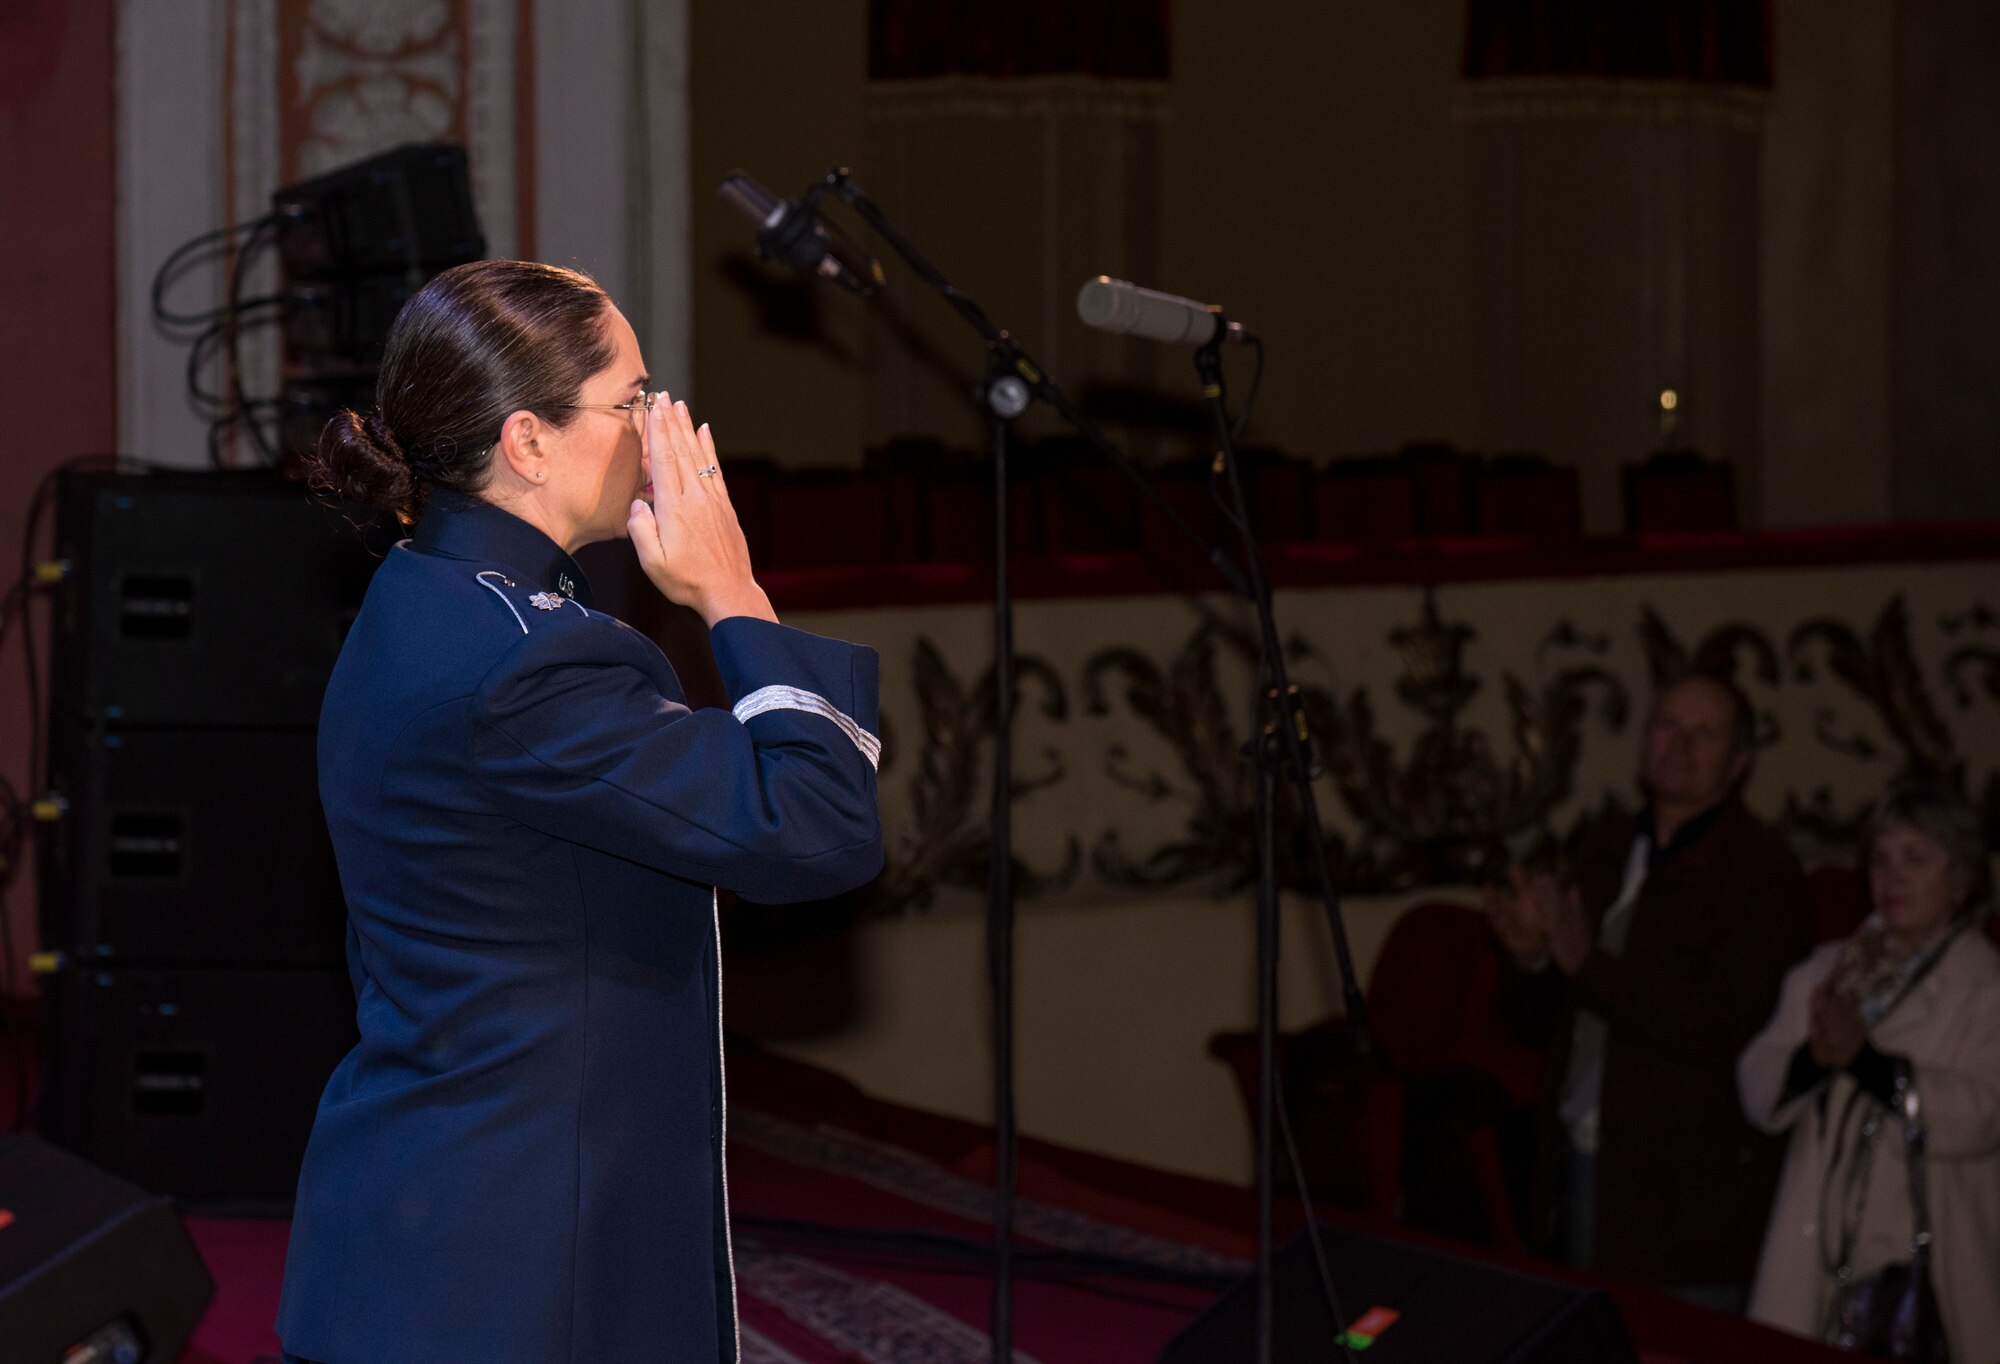 U.S. Air Force Lt. Col Cristina Moore Urrutia, U.S. Air Forces in Europe Ambassadors Jazz Band commander and conductor, salutes the citizens of Vinnytsia during a concert with the USAFE Band and the Ukrainian National Presidential Orchestra at the Music and Drama Theater in Vinnytsia, Ukraine, October 14, 2019. The USAFE Band traveled to six cities in central and western Ukraine October 6-20, 2019 to conduct the “Music of Freedom” tour, which celebrated the shared spirit of freedom and enduring partnership between U.S. and Ukrainian armed forces. (U.S. Air Force photo by Airman 1st Class Jennifer Zima)